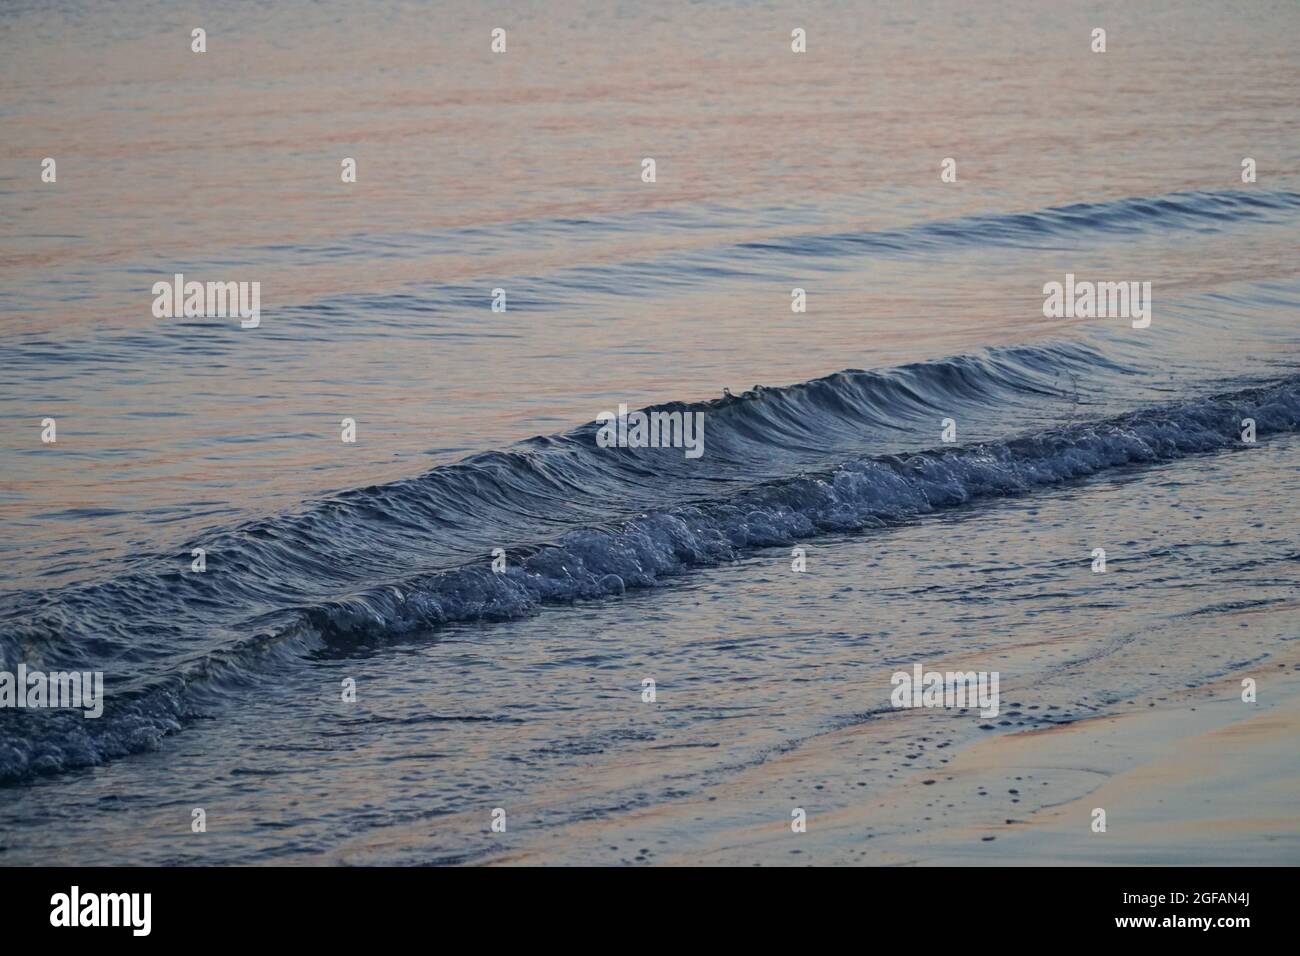 East Wittering, UK, 23 August 2021: gentle waves on sandy beach at dusk reflect the blues and pinks in the sky just after sunset. The sea is the Engli Stock Photo